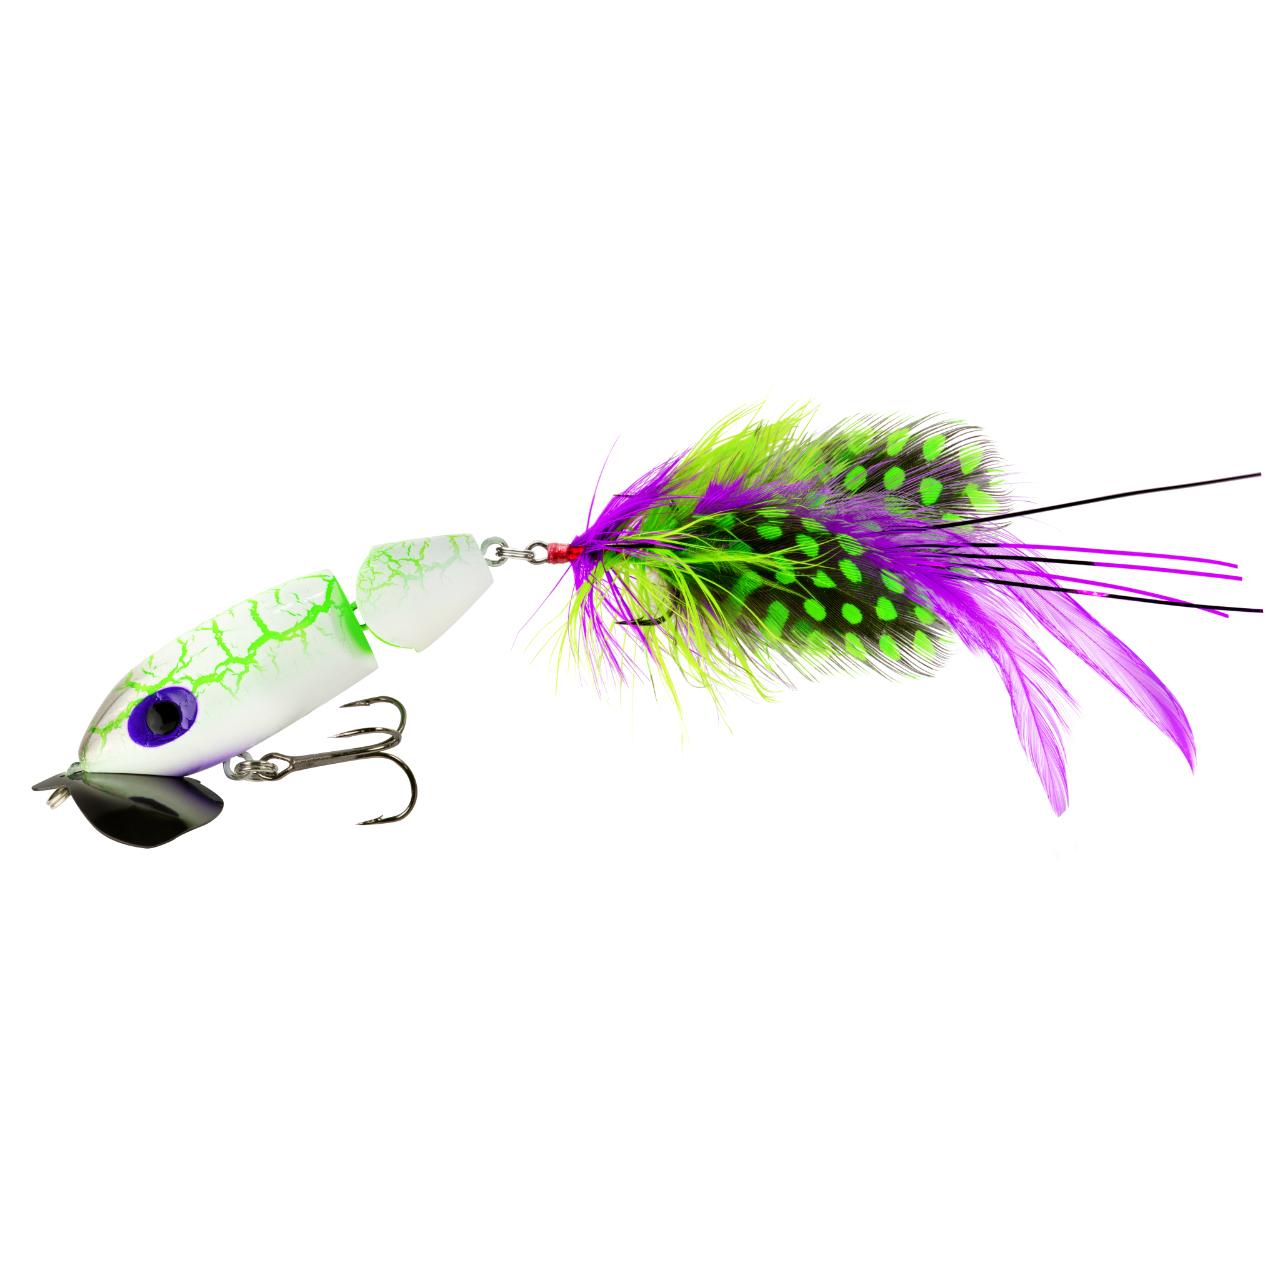 Arbogast G621-536 Jointed Jitterbug 2.0, 2 1/2", 3/8oz, #6 feather